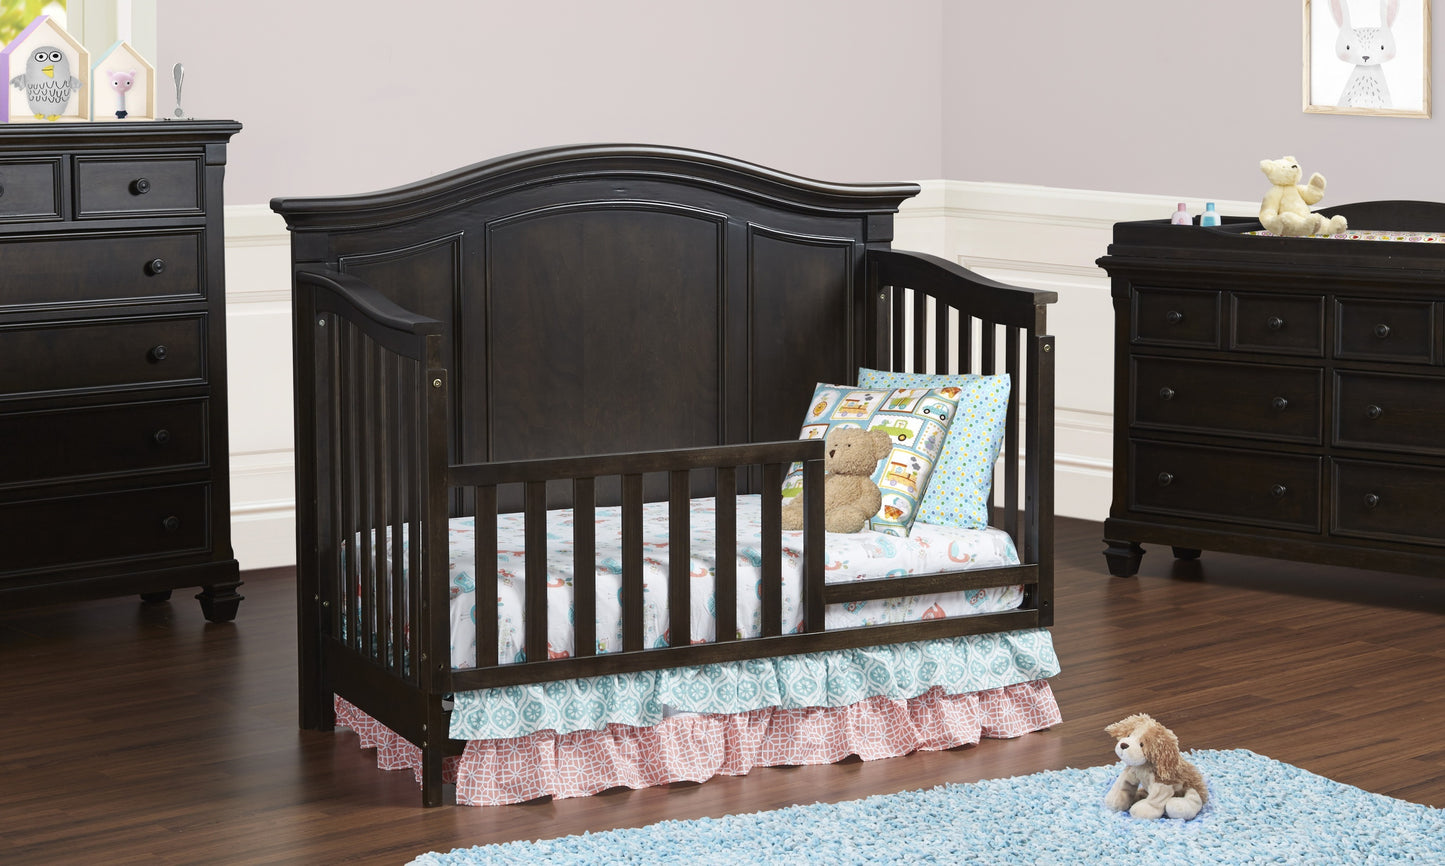 Glendale 4-in-1 Convertible Crib Charcoal Brown